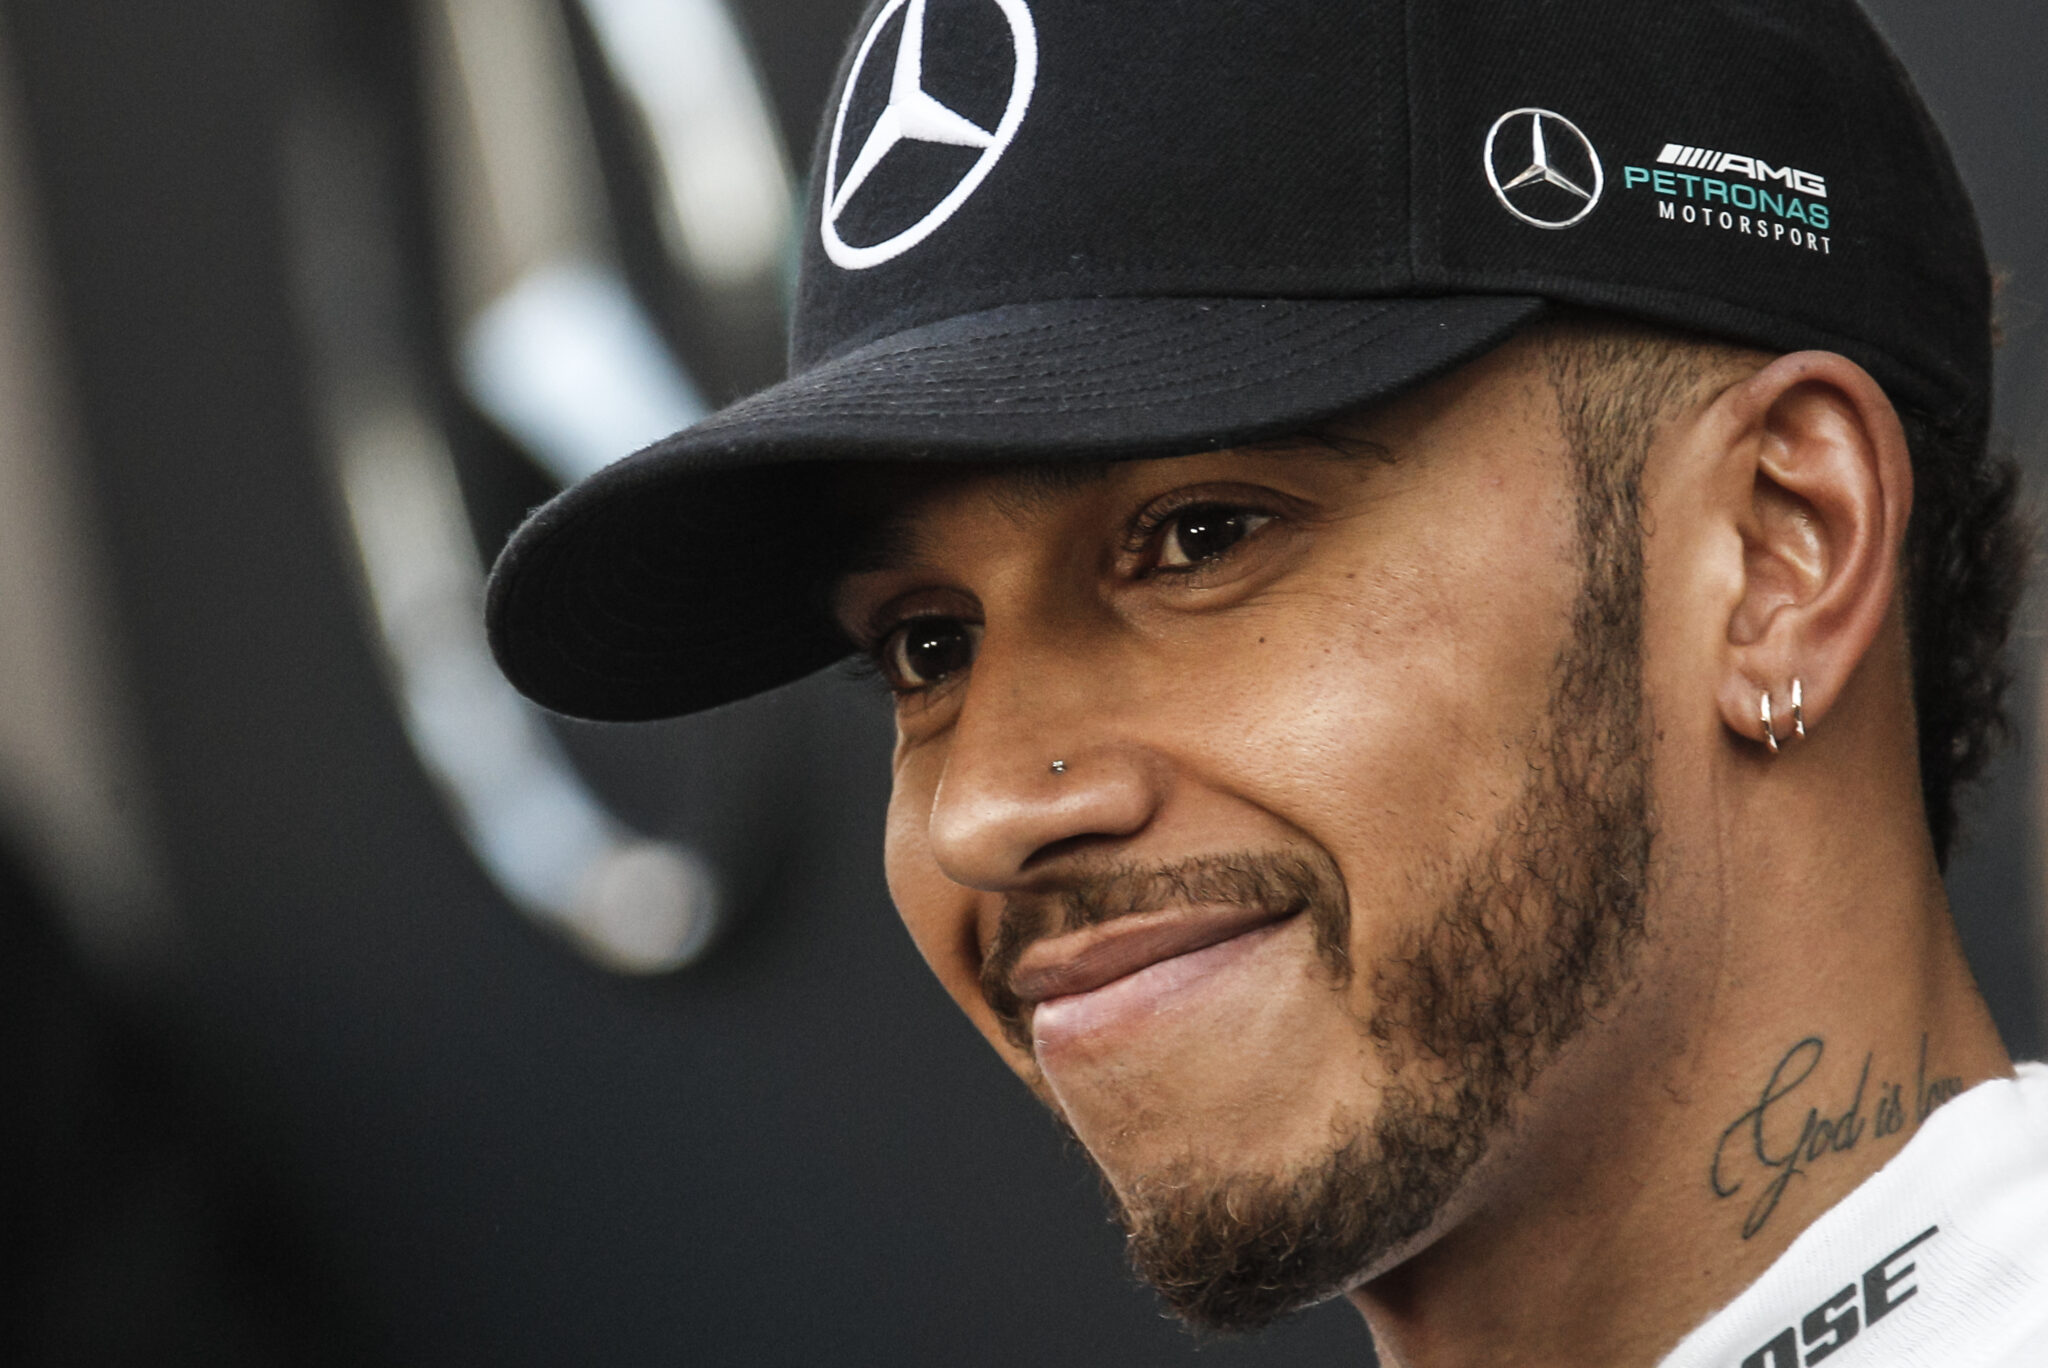 Lewis Hamilton smiles for the camera after a race